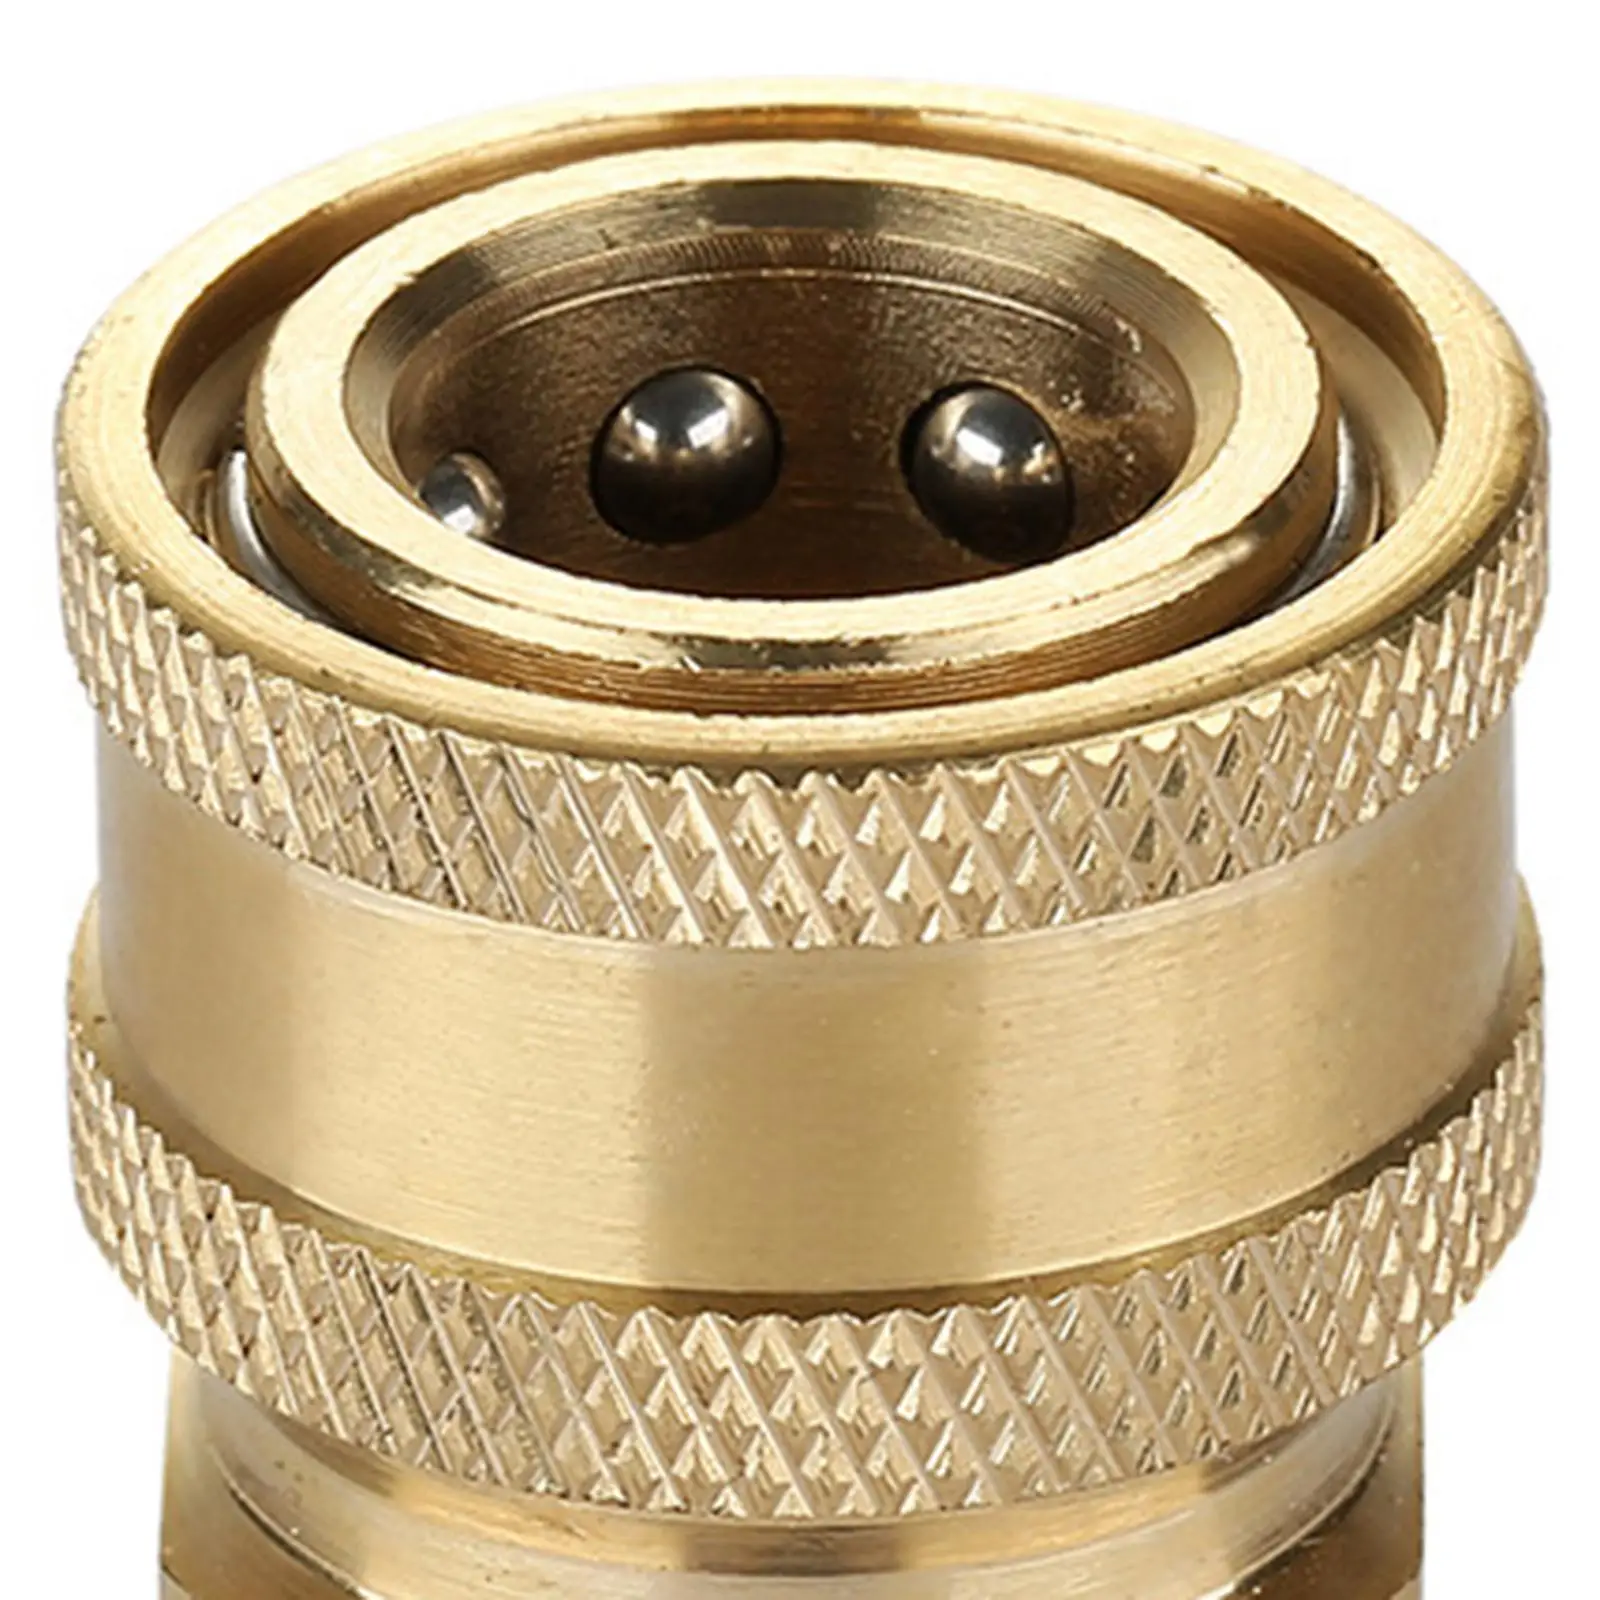 Pressure Washer Adapter Set (M22-14mm) Sturdy Brass Rated up to 5000PSI High